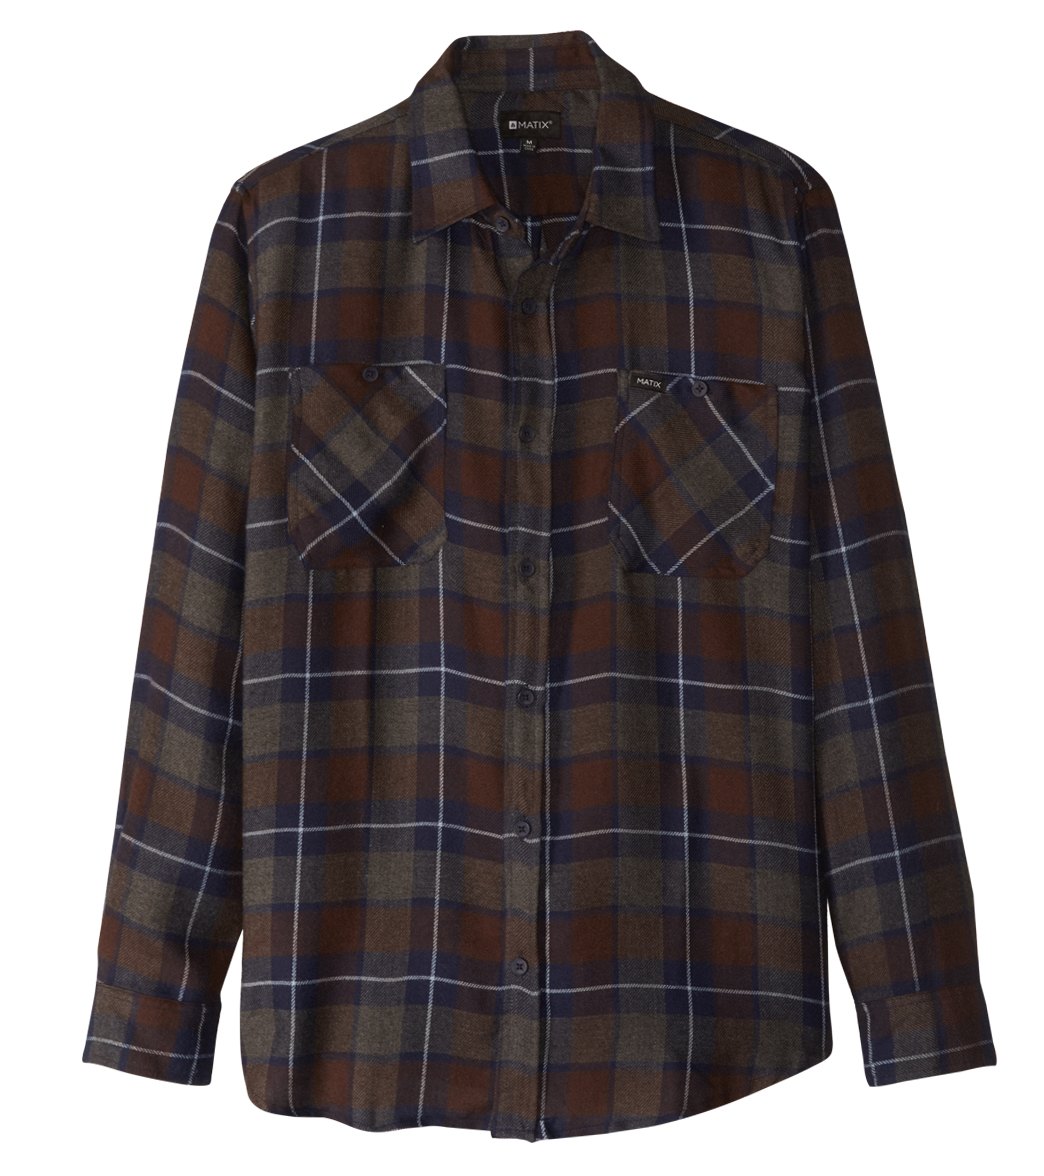 Matix Men's Sycamore Long Sleeve Flannel Shirt - Heather Charcoal Small Cotton - Swimoutlet.com